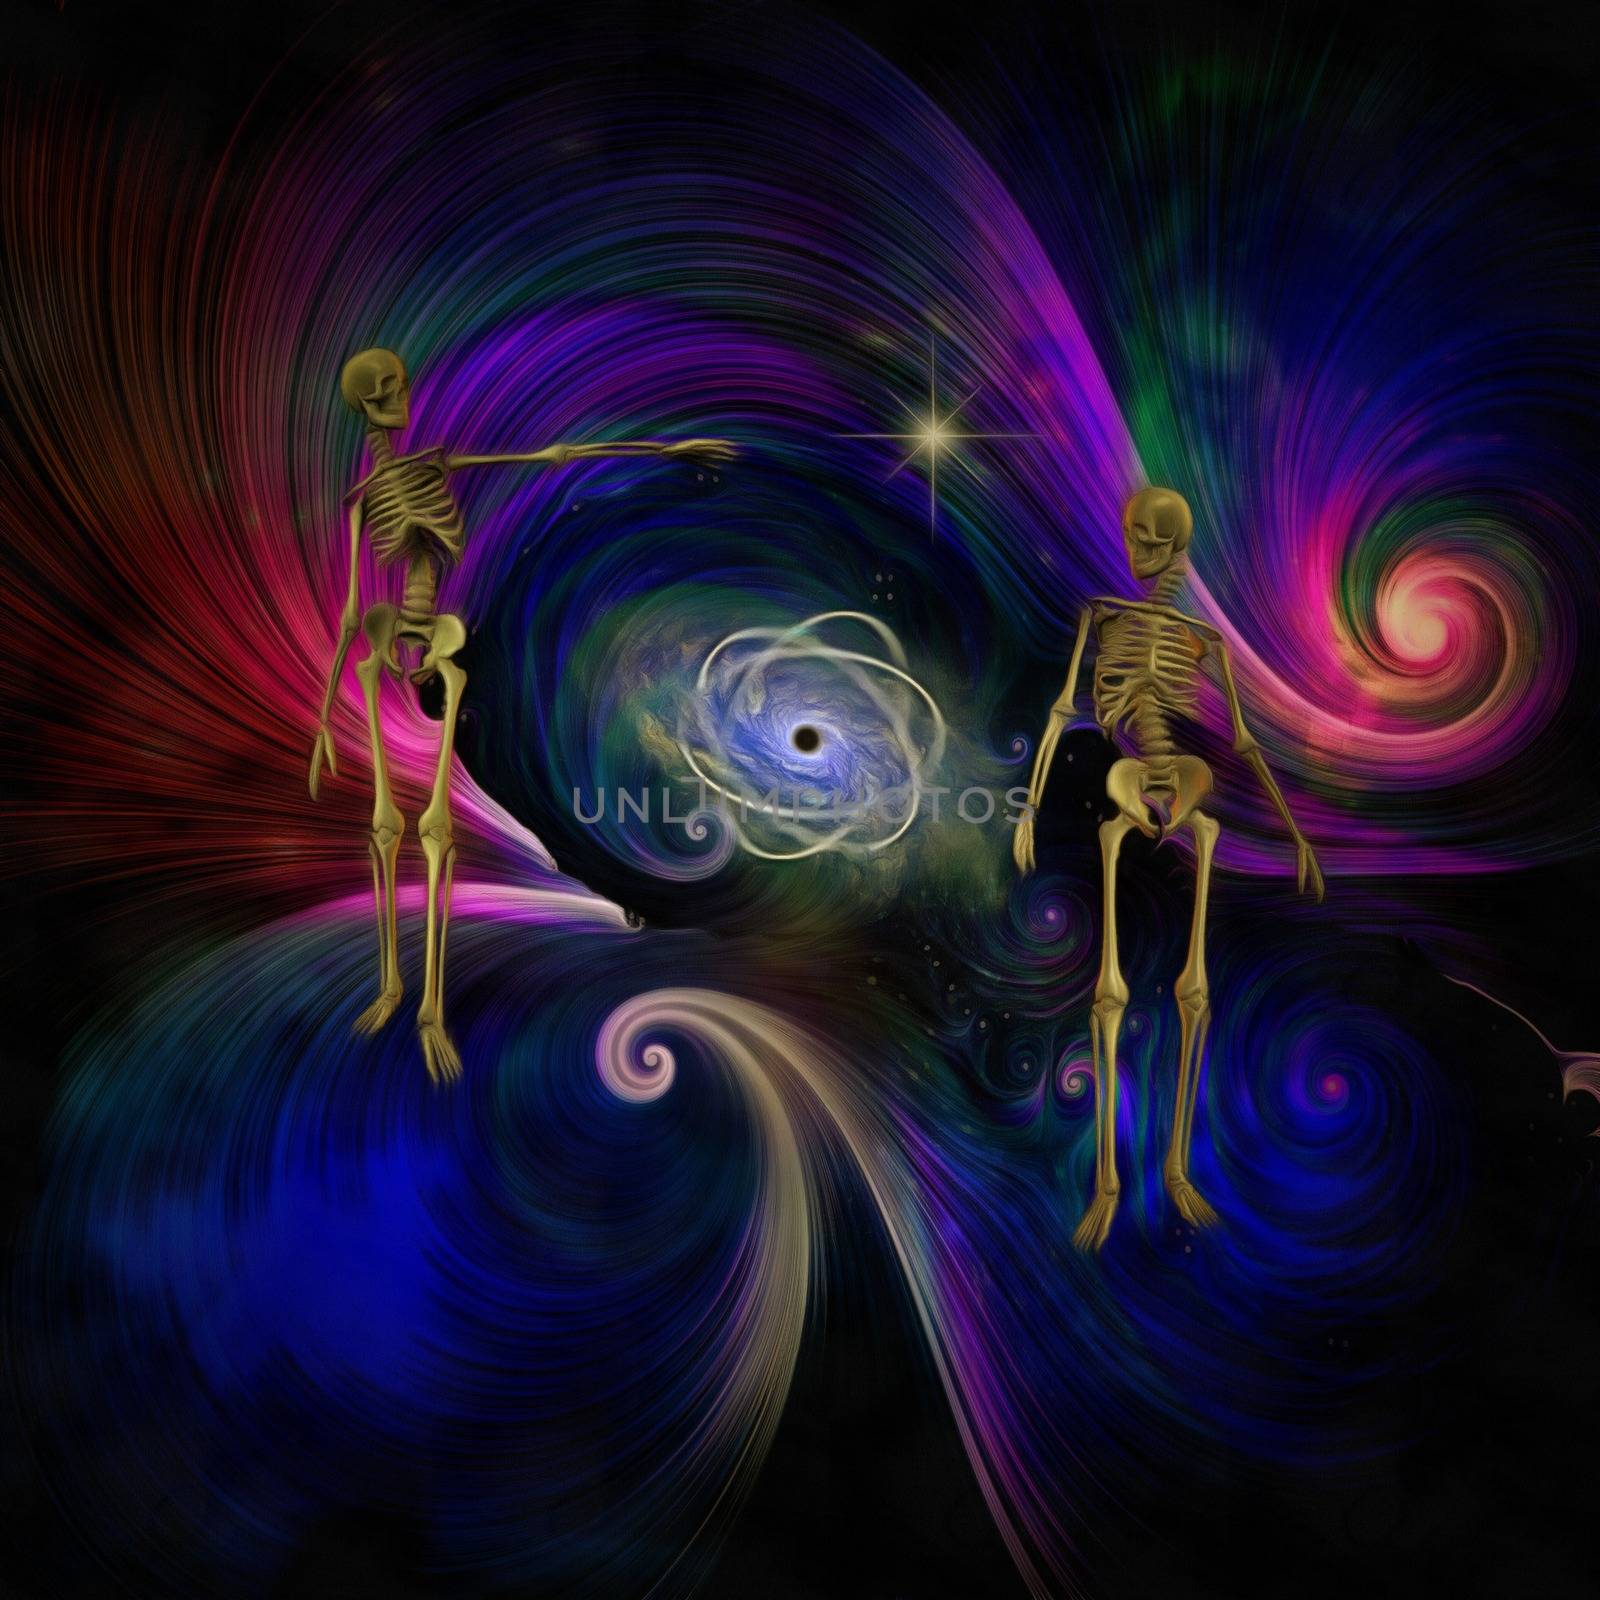 Surreal painting. Black hole or atom core in a center of universe. Two skeletons stands near.